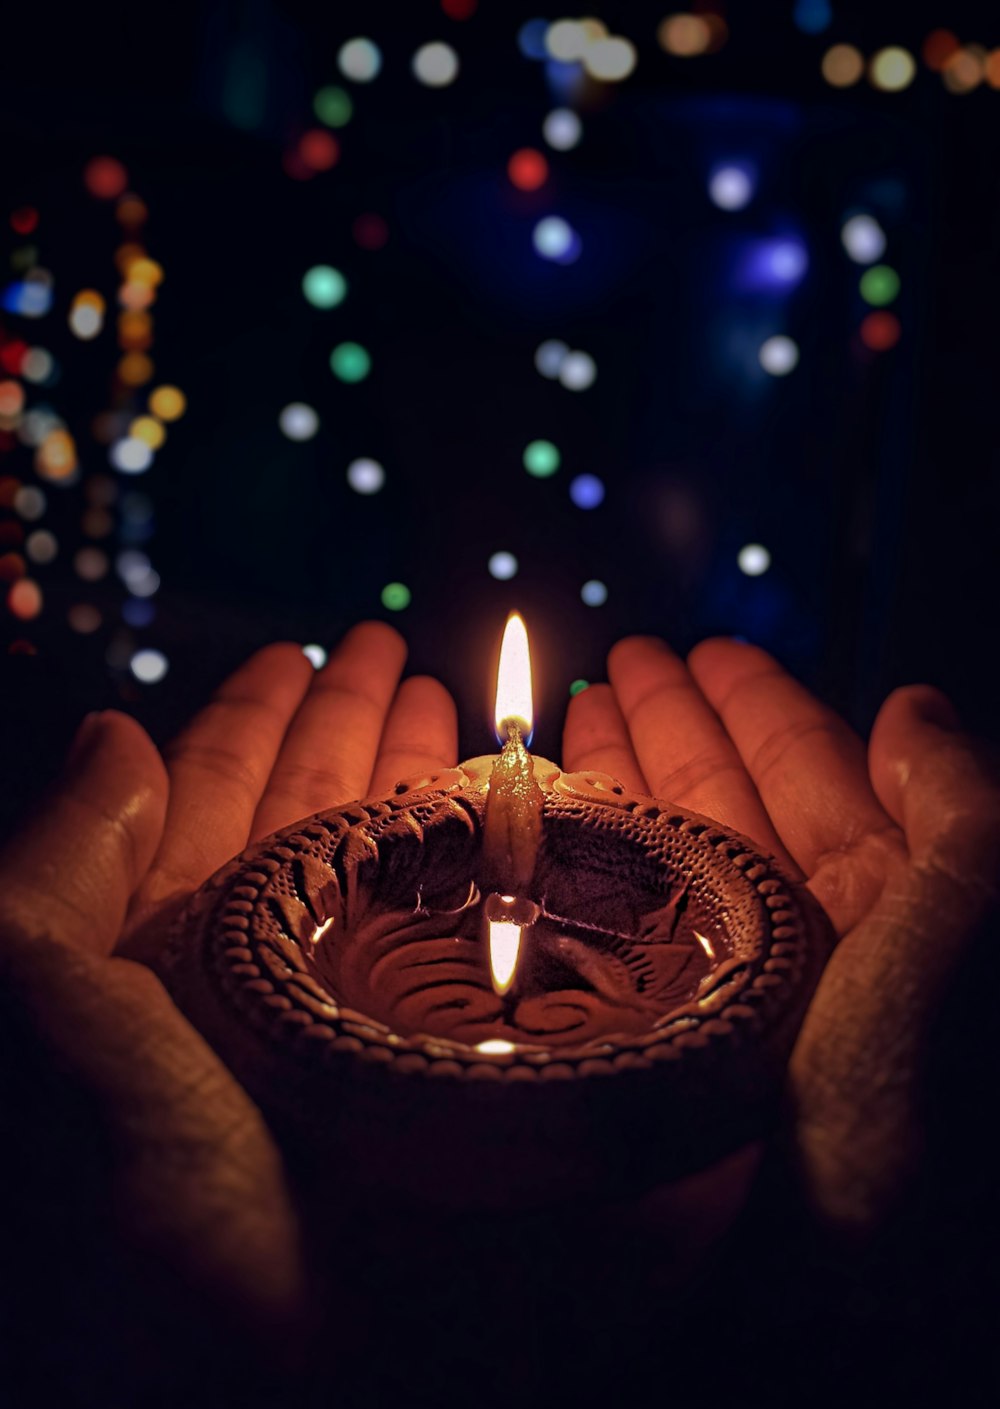 “Ultimate Collection of Diwali Diya Images: Over 999+ Incredible Images in Full 4K Quality”